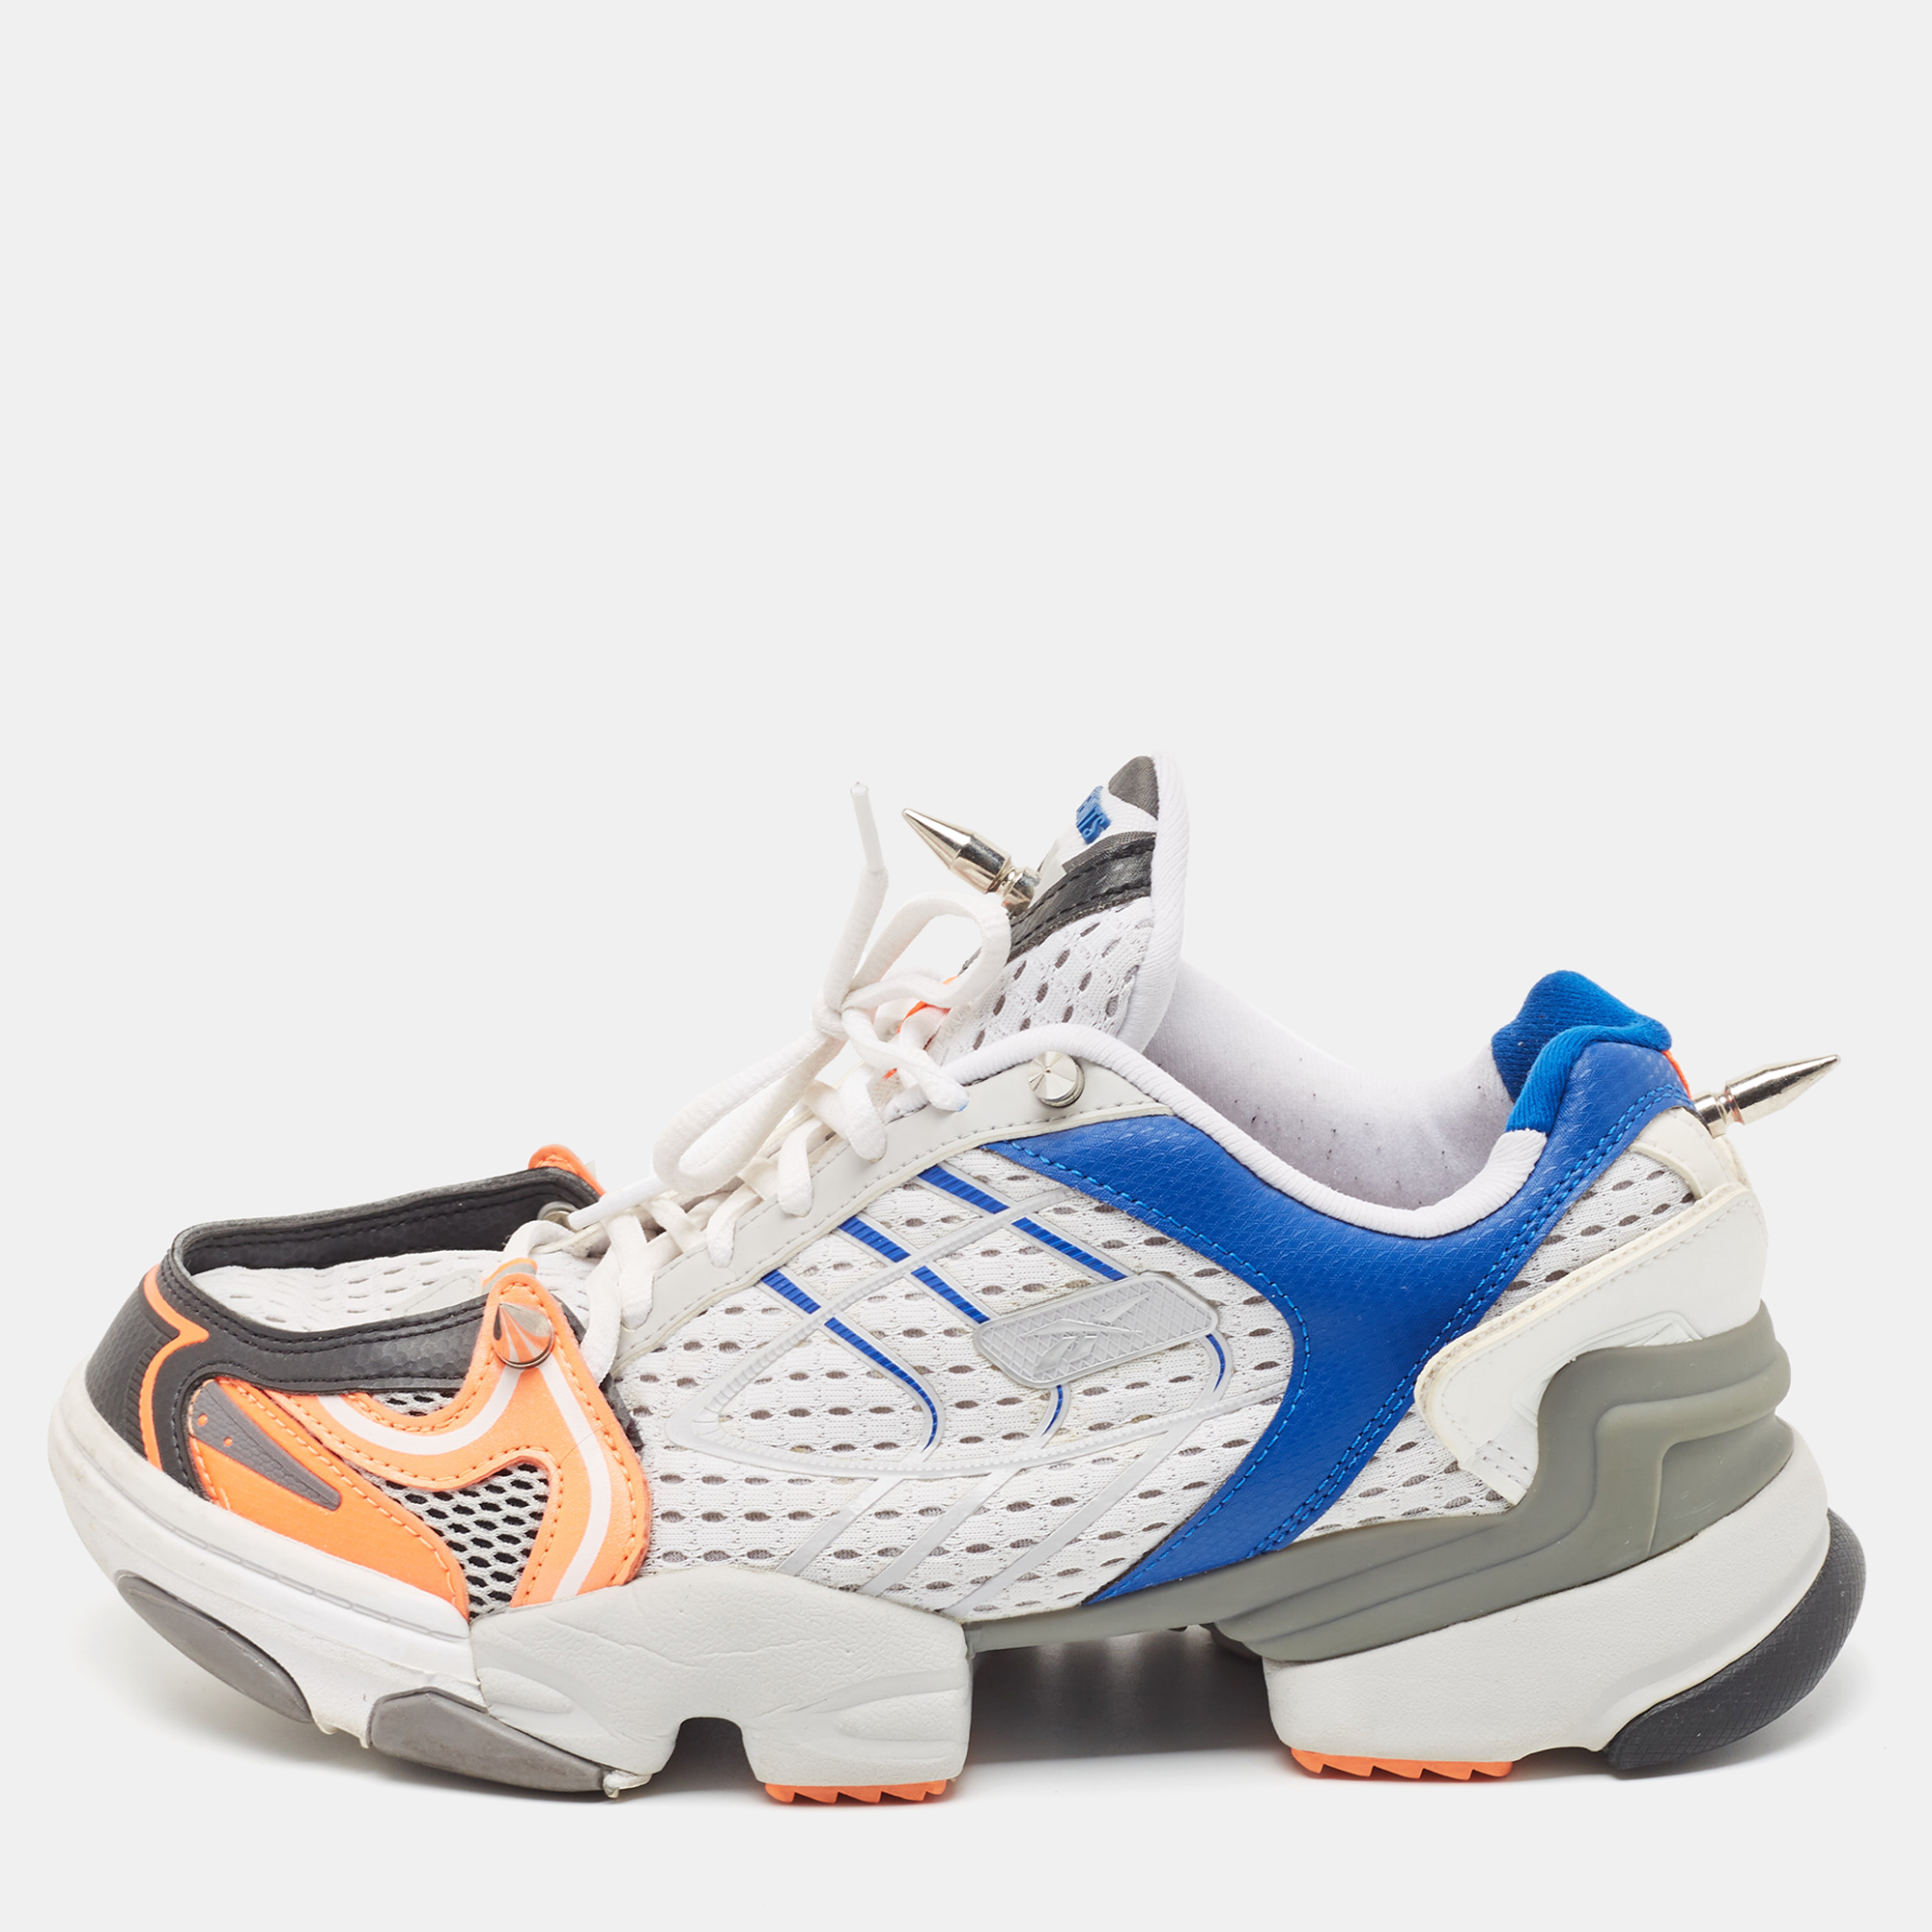 Vetements X Reebok Multicolor Mesh And Leather Spike Runner 400 Sneakers Size 41